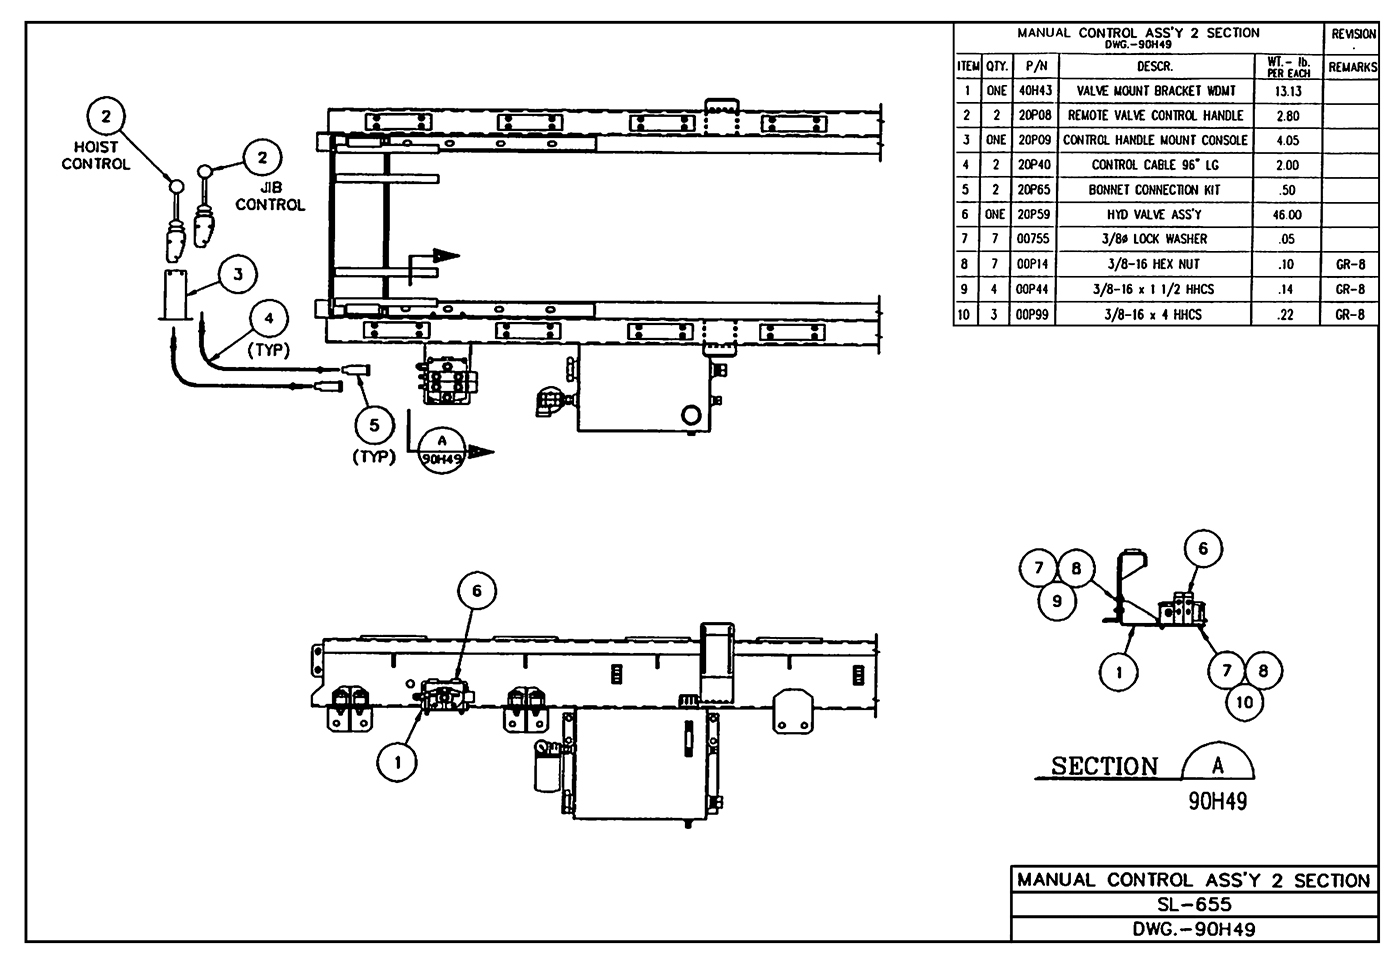 SL-655 Manual Control Assembly (2 Section) Diagram